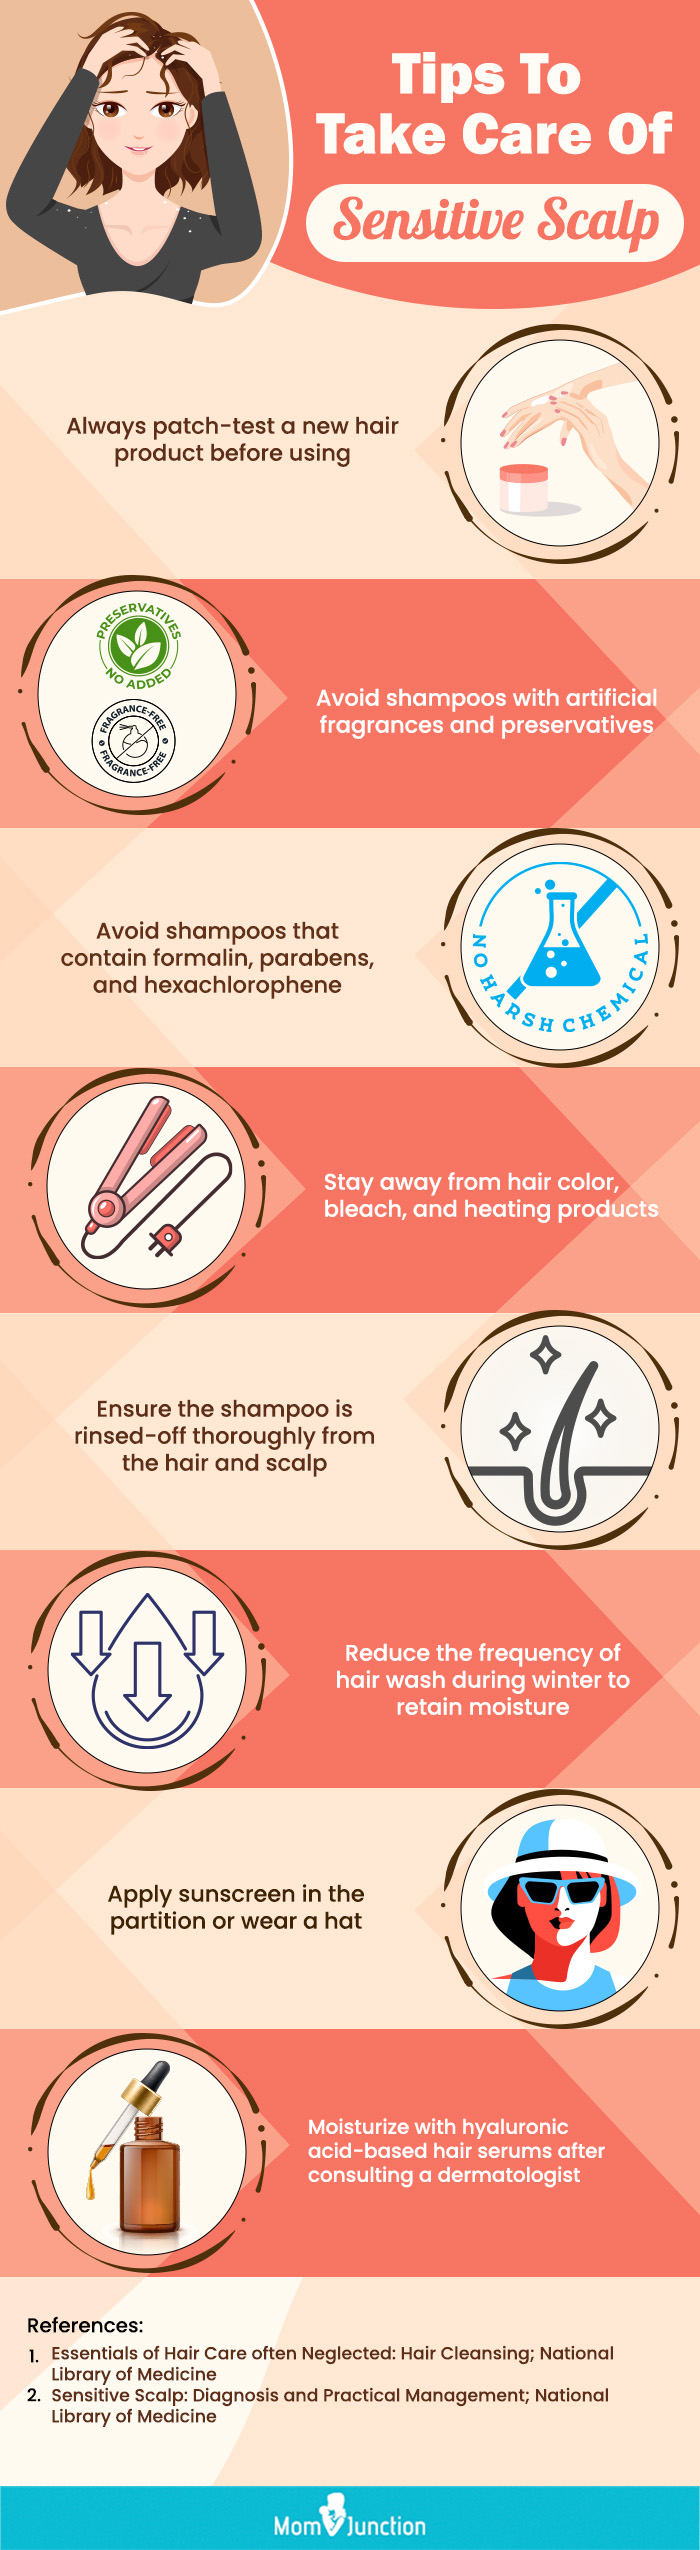 Tips To Take Care Of Sensitive Scalp